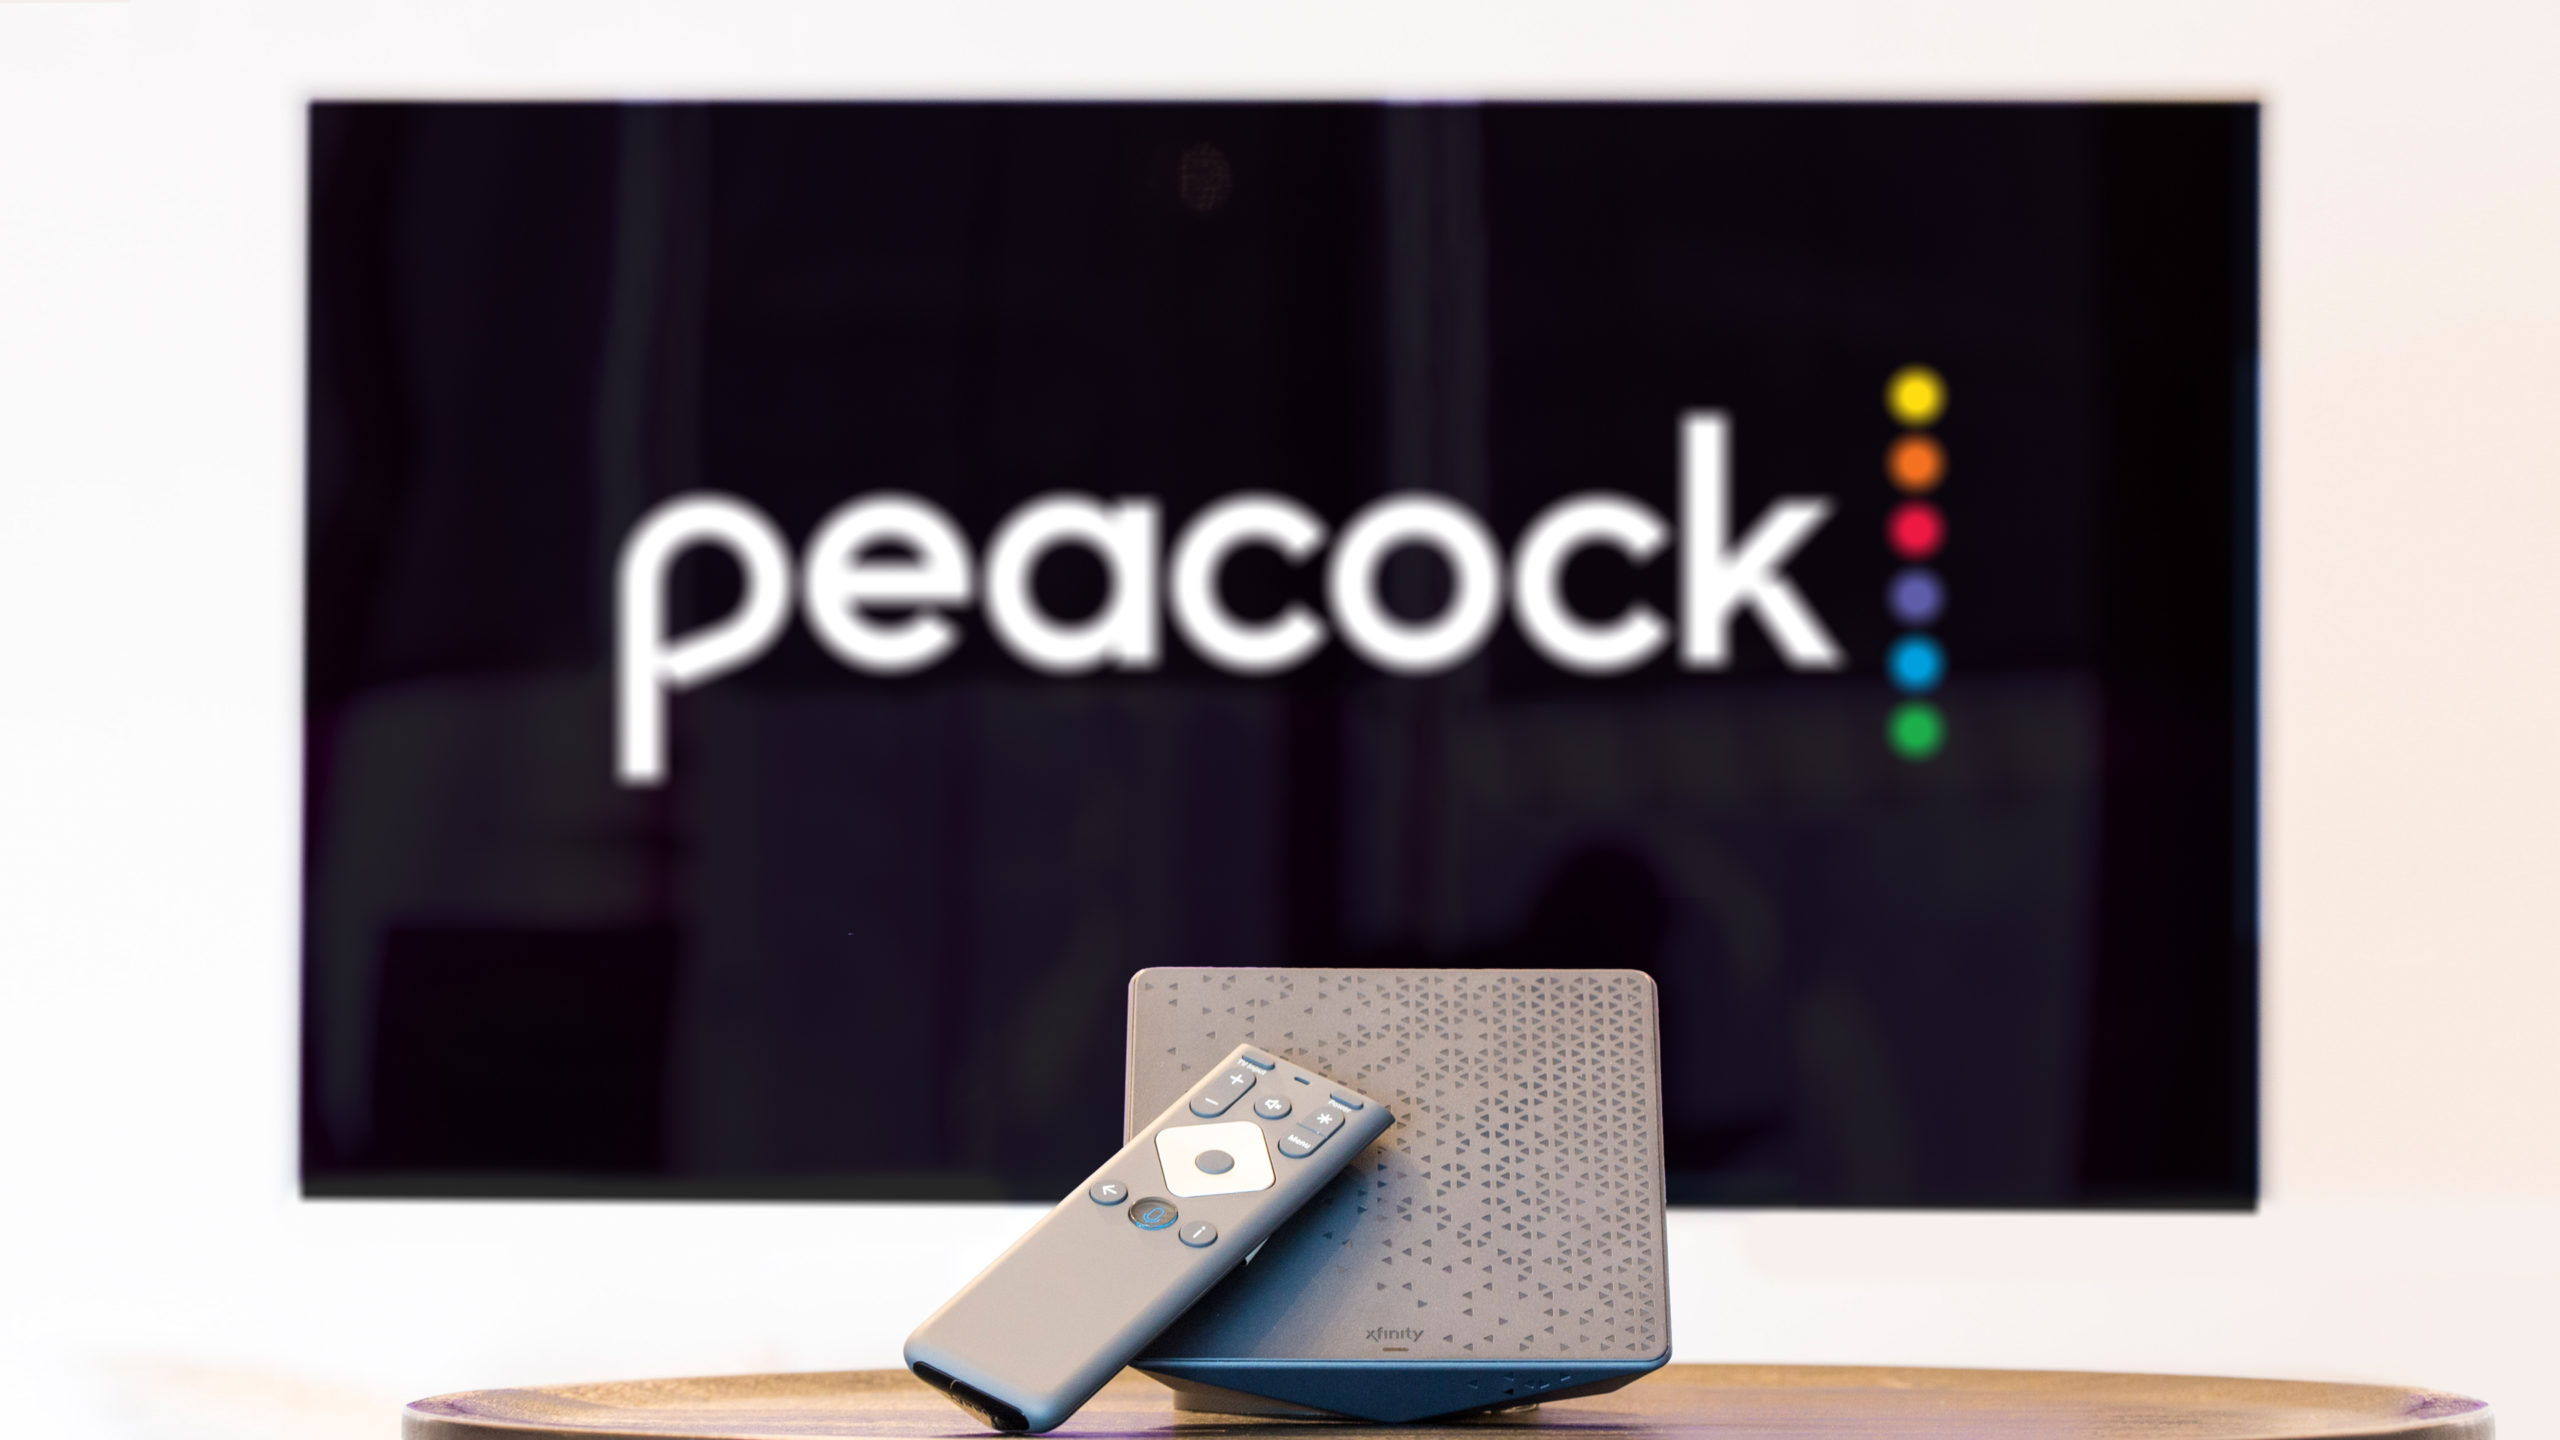 The Peacock logo displayed on a TV